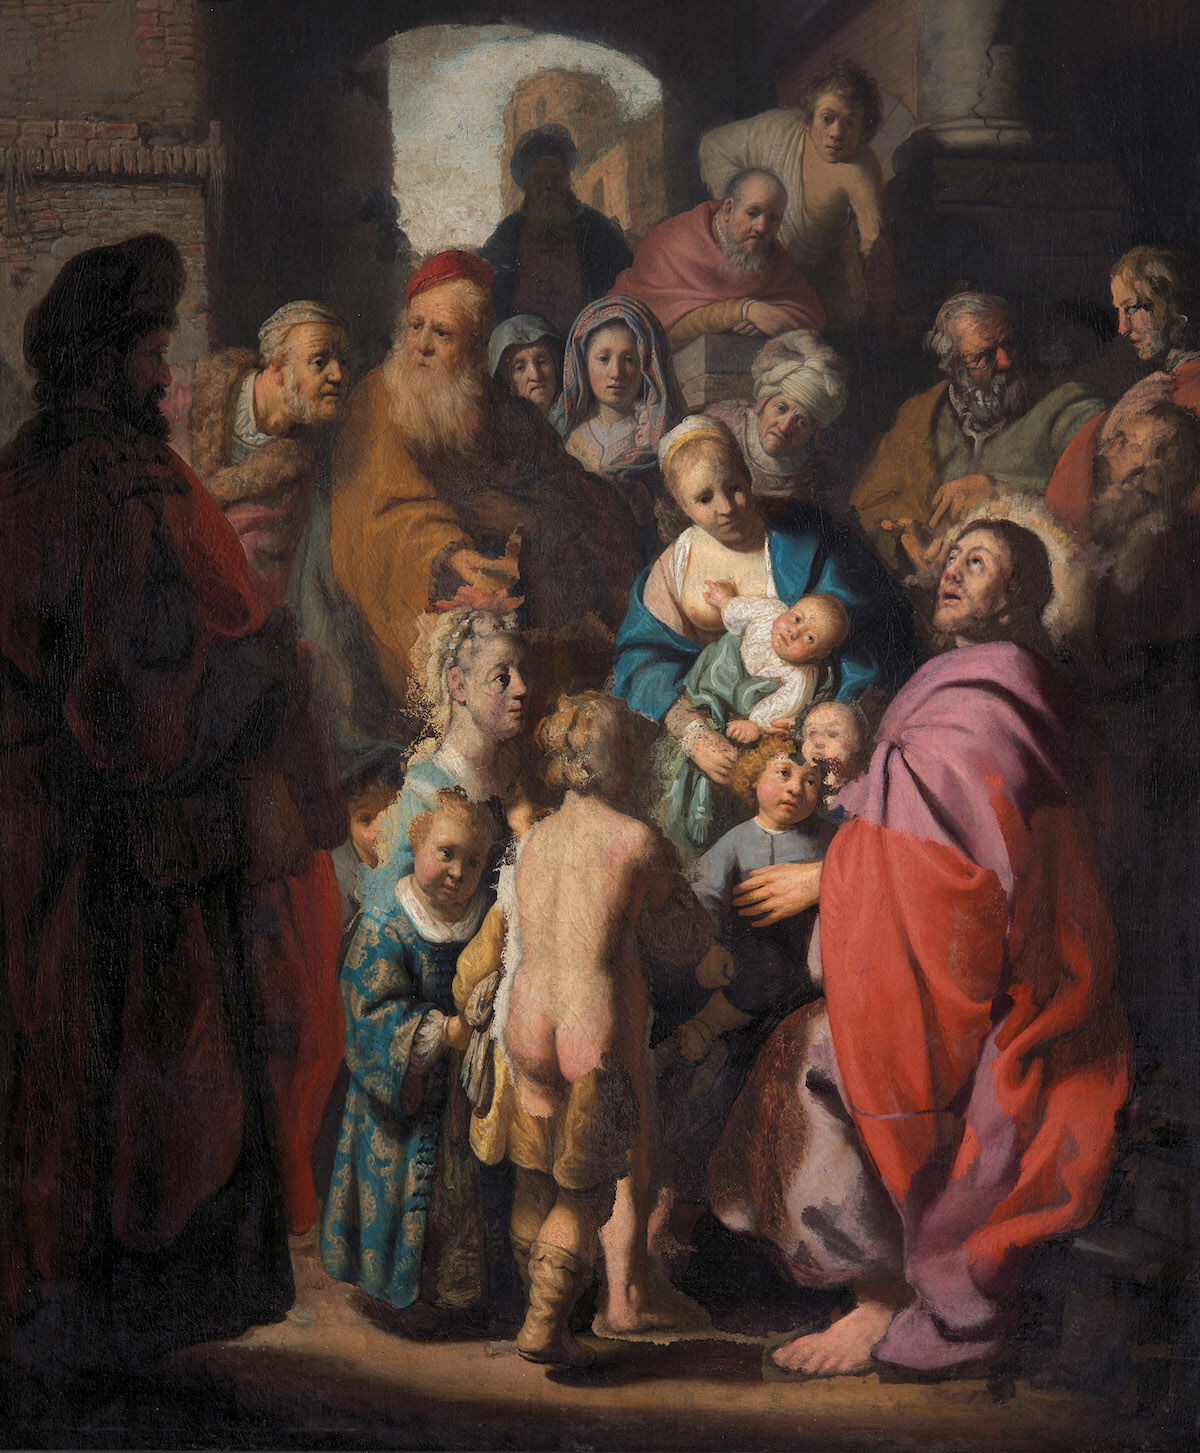 Rembrandt and others, Let the Little Children Come to Me, ca. 1627–28 and later. Courtesy Jan Six Fine Art, Amsterdam.